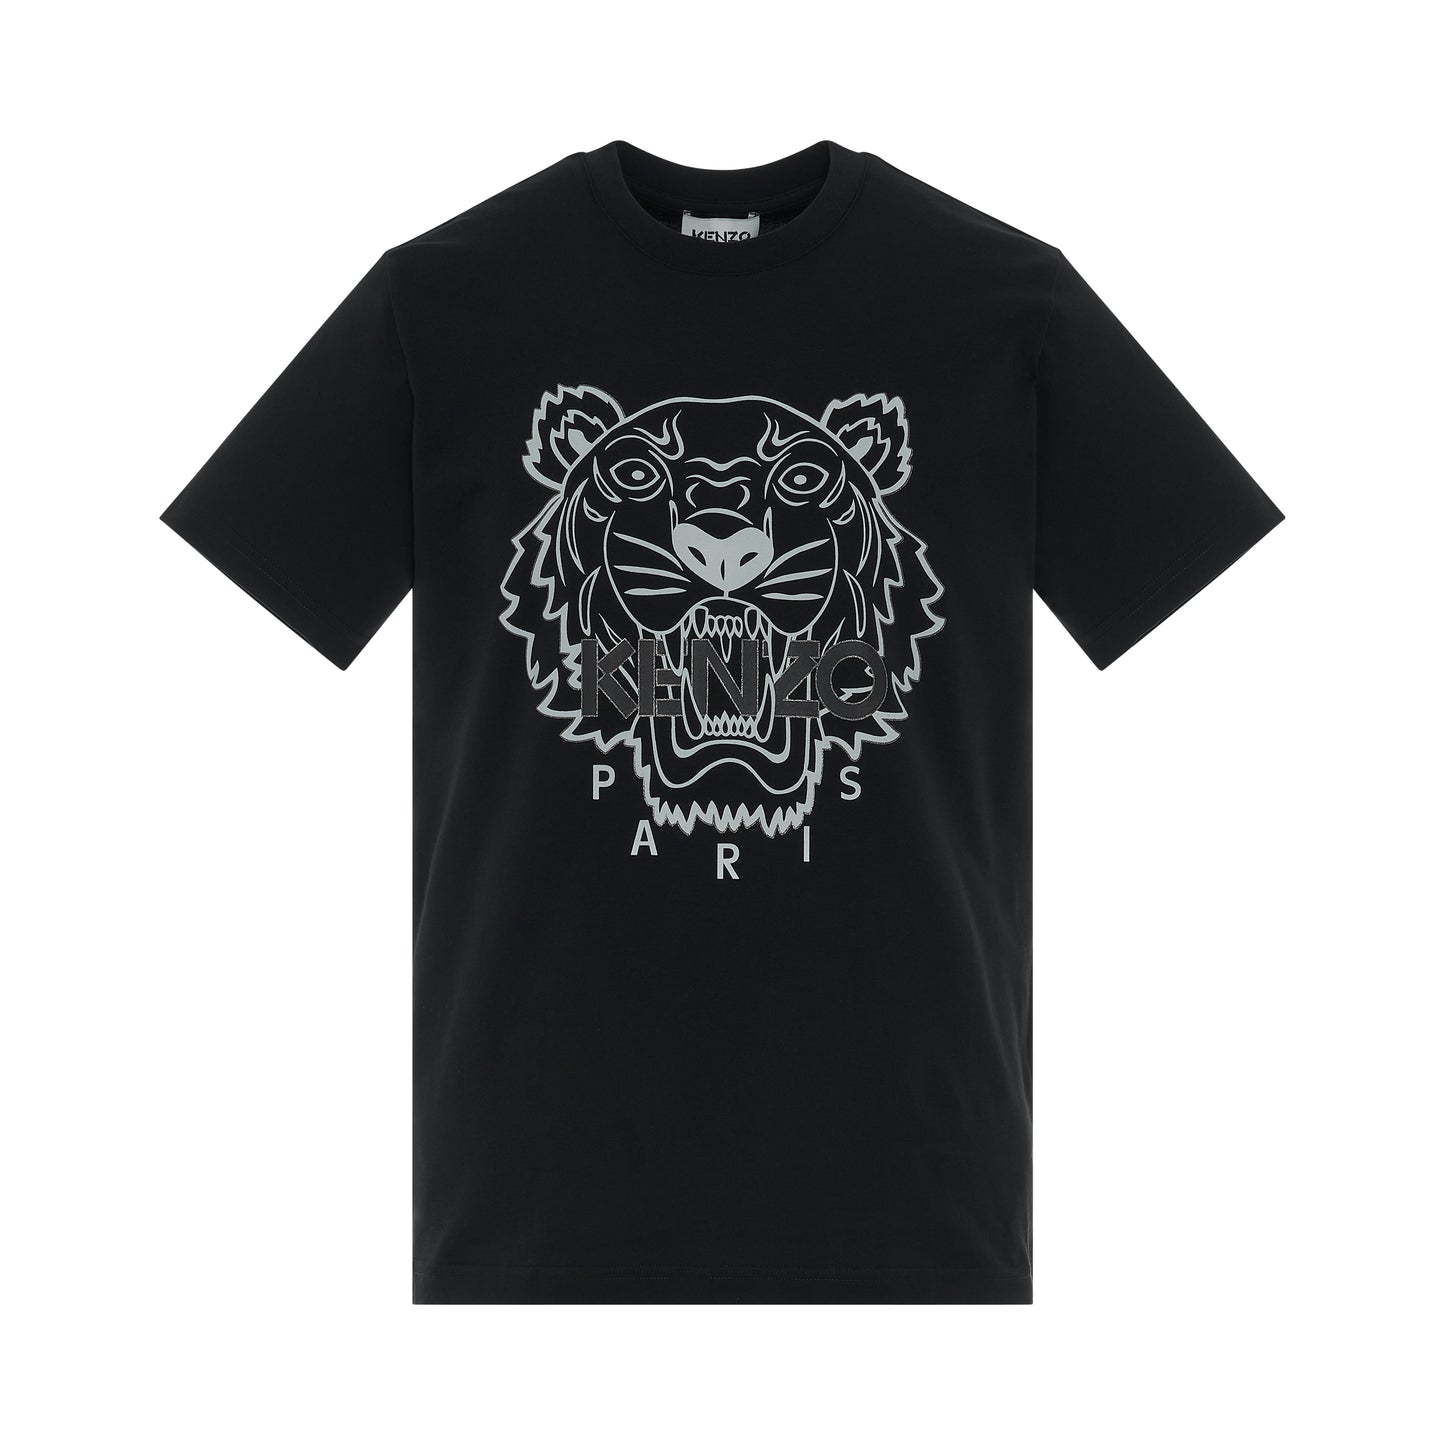 Iconic Tiger Printed T-Shirt In Black